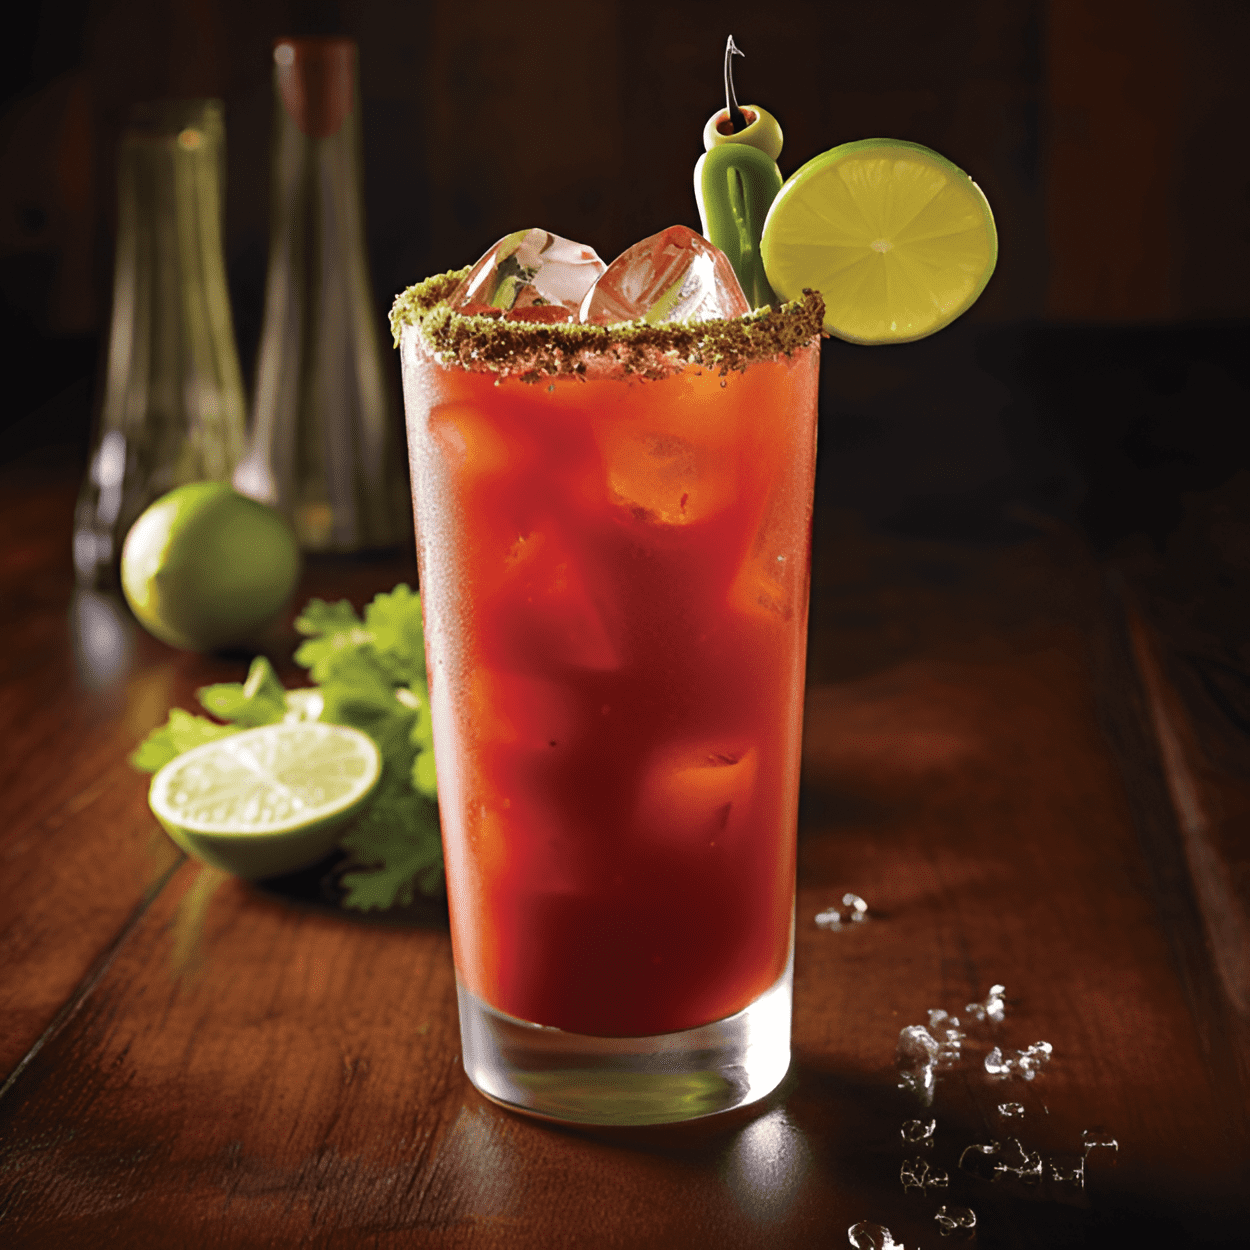 Bloody Caesar Cocktail Recipe - The Bloody Caesar is a savory, tangy, and slightly spicy cocktail. The combination of Clamato juice, vodka, and hot sauce creates a bold and robust flavor profile that is both refreshing and satisfying.